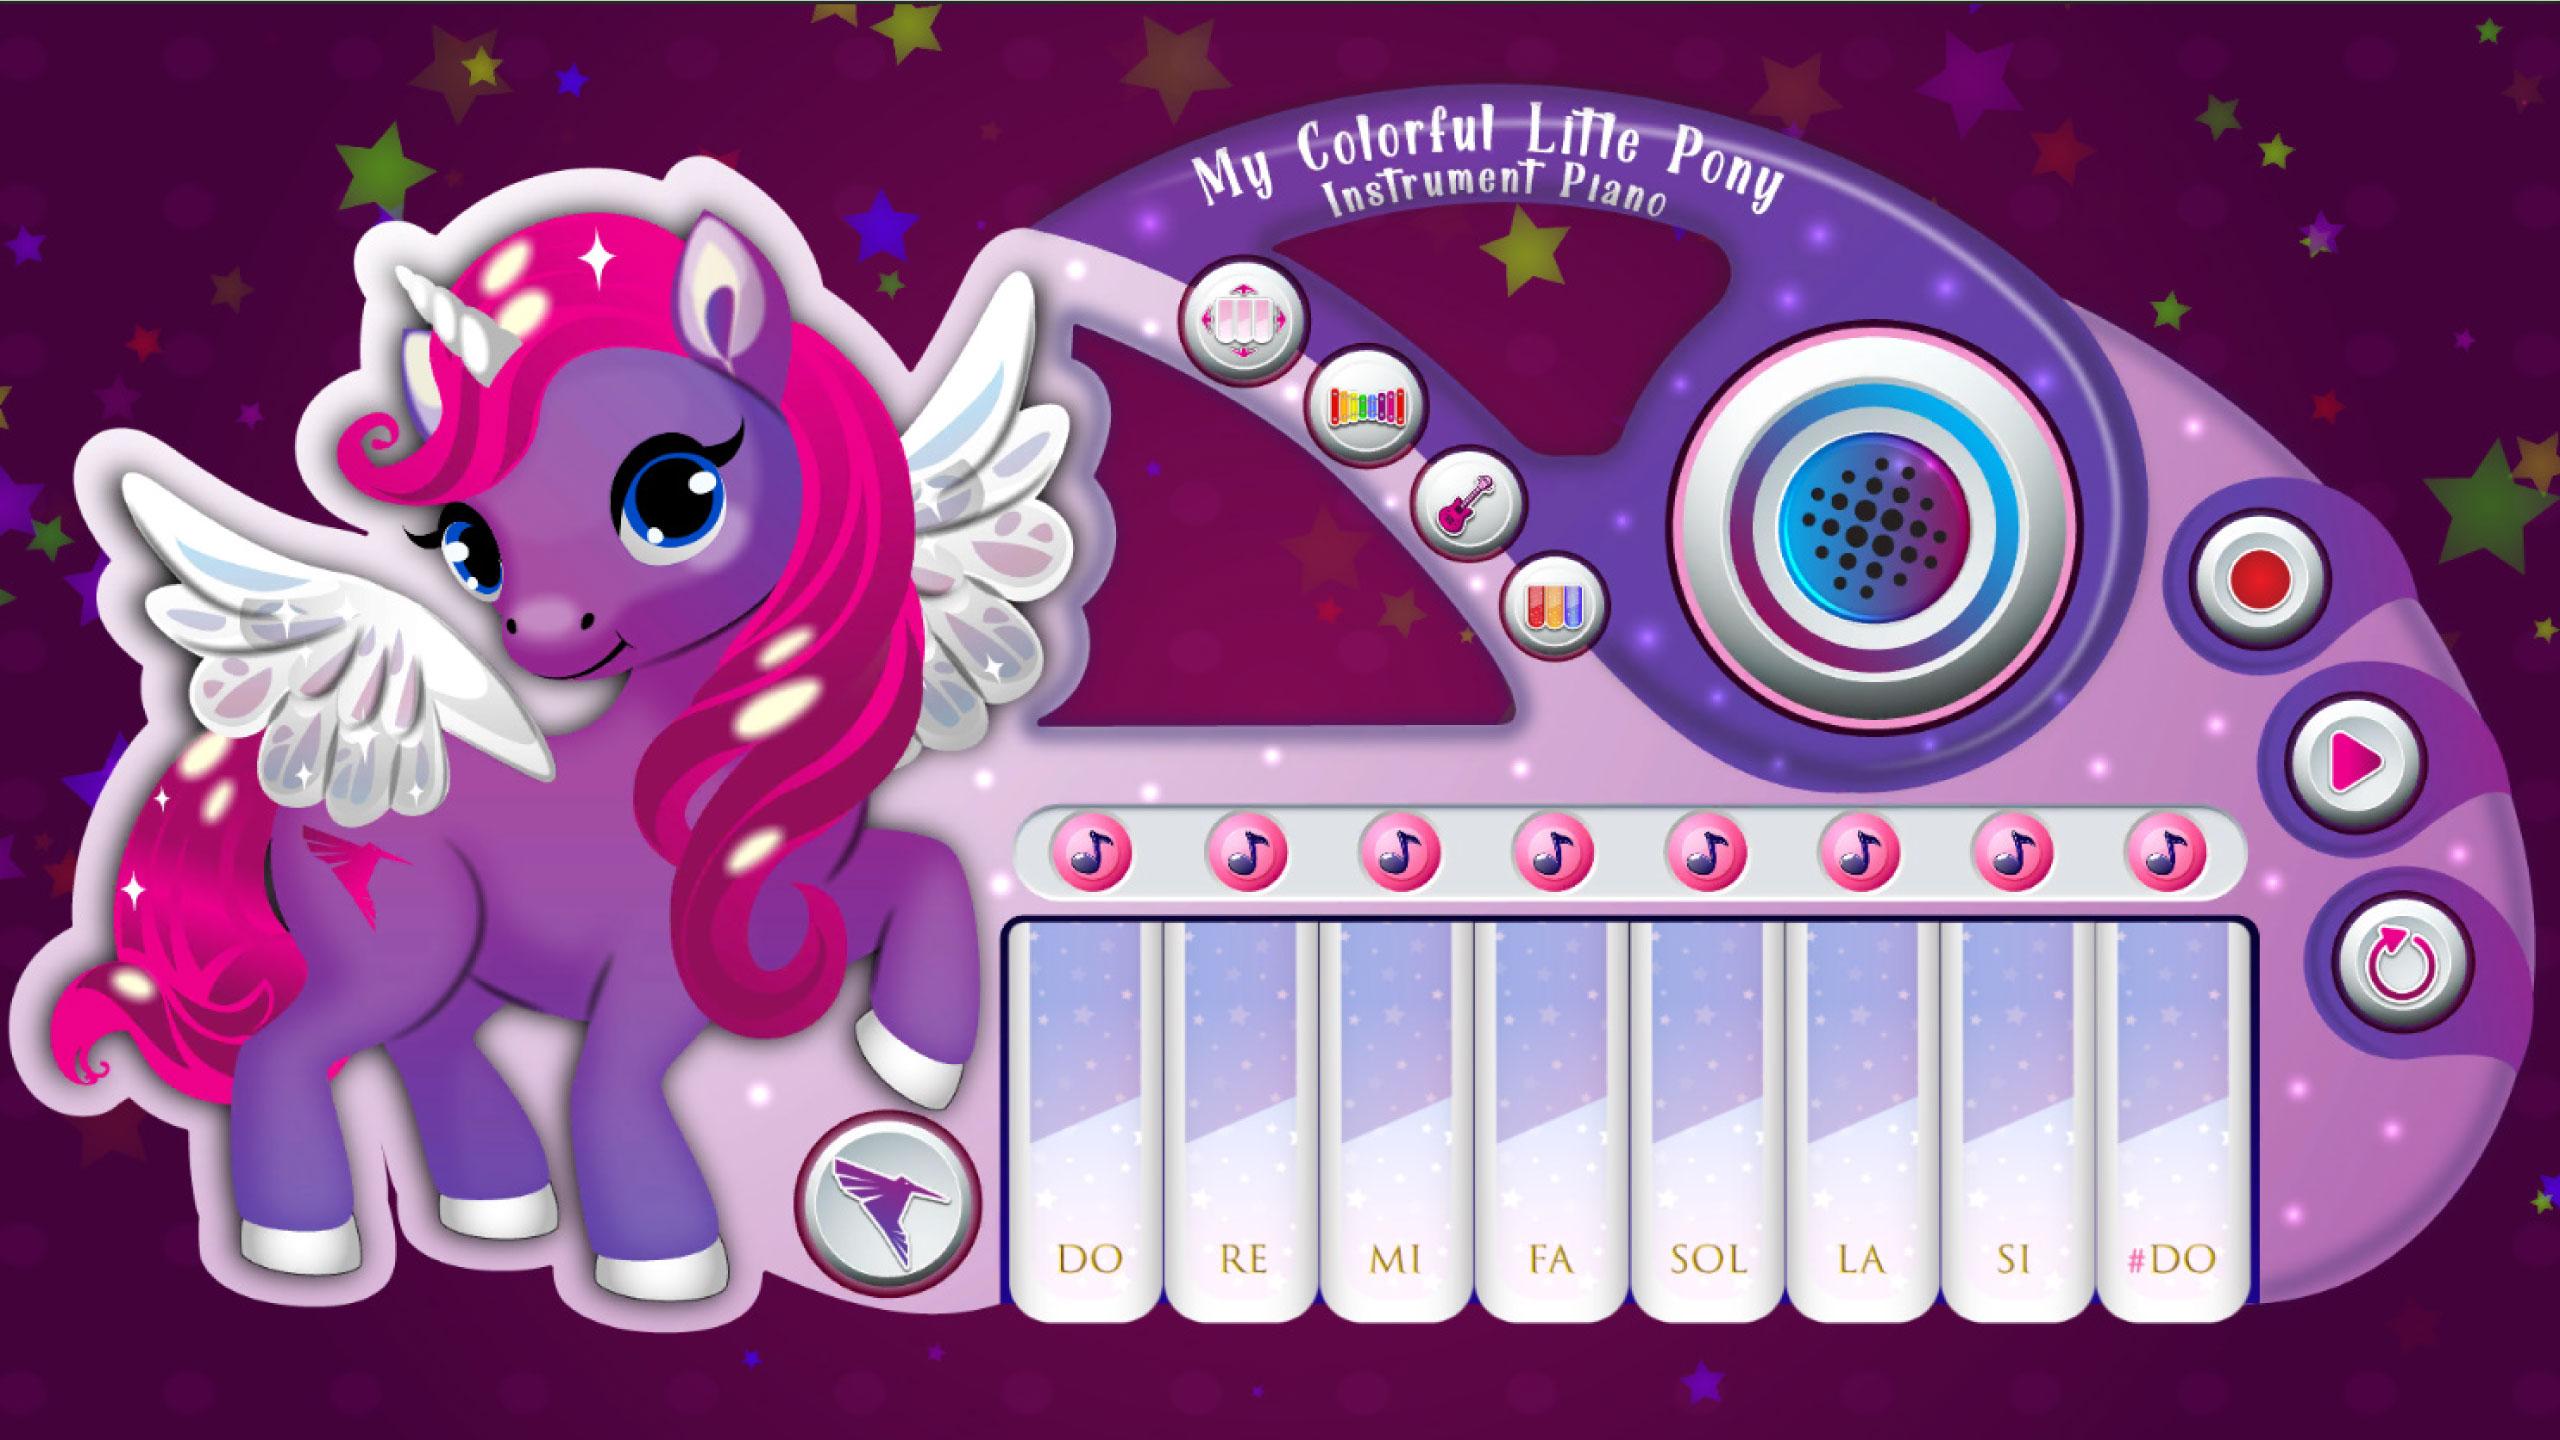 My Colorful Litle Pony Instrument - Piano 2.0 Screenshot 7